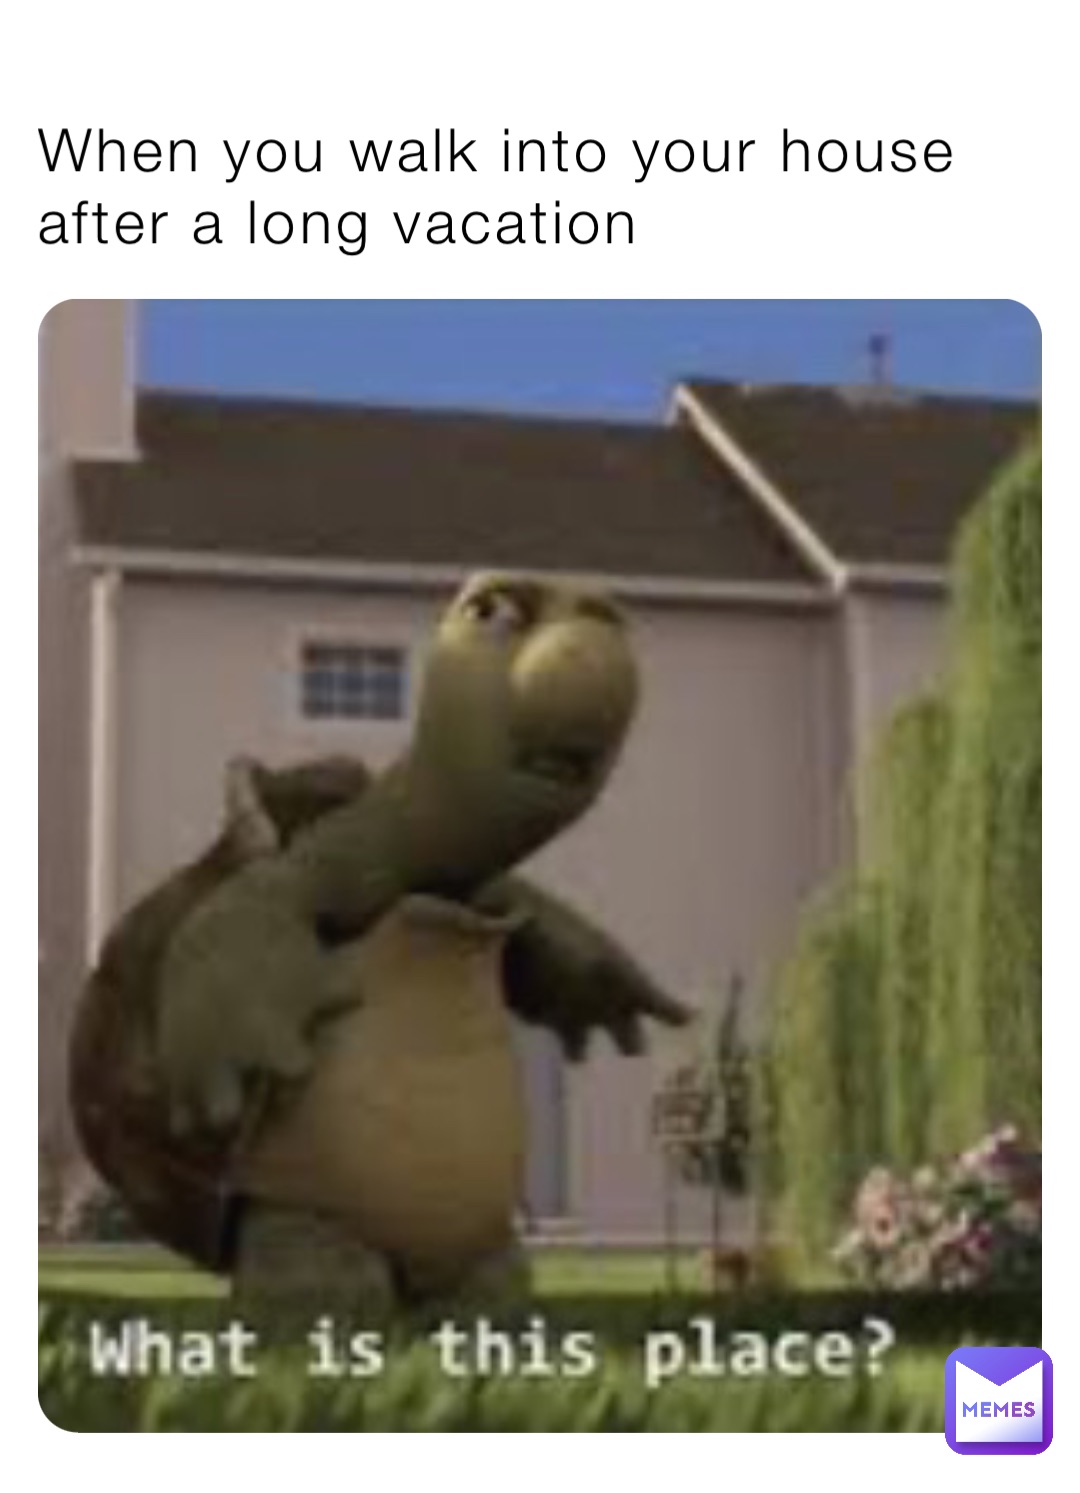 When you walk into your house after a long vacation